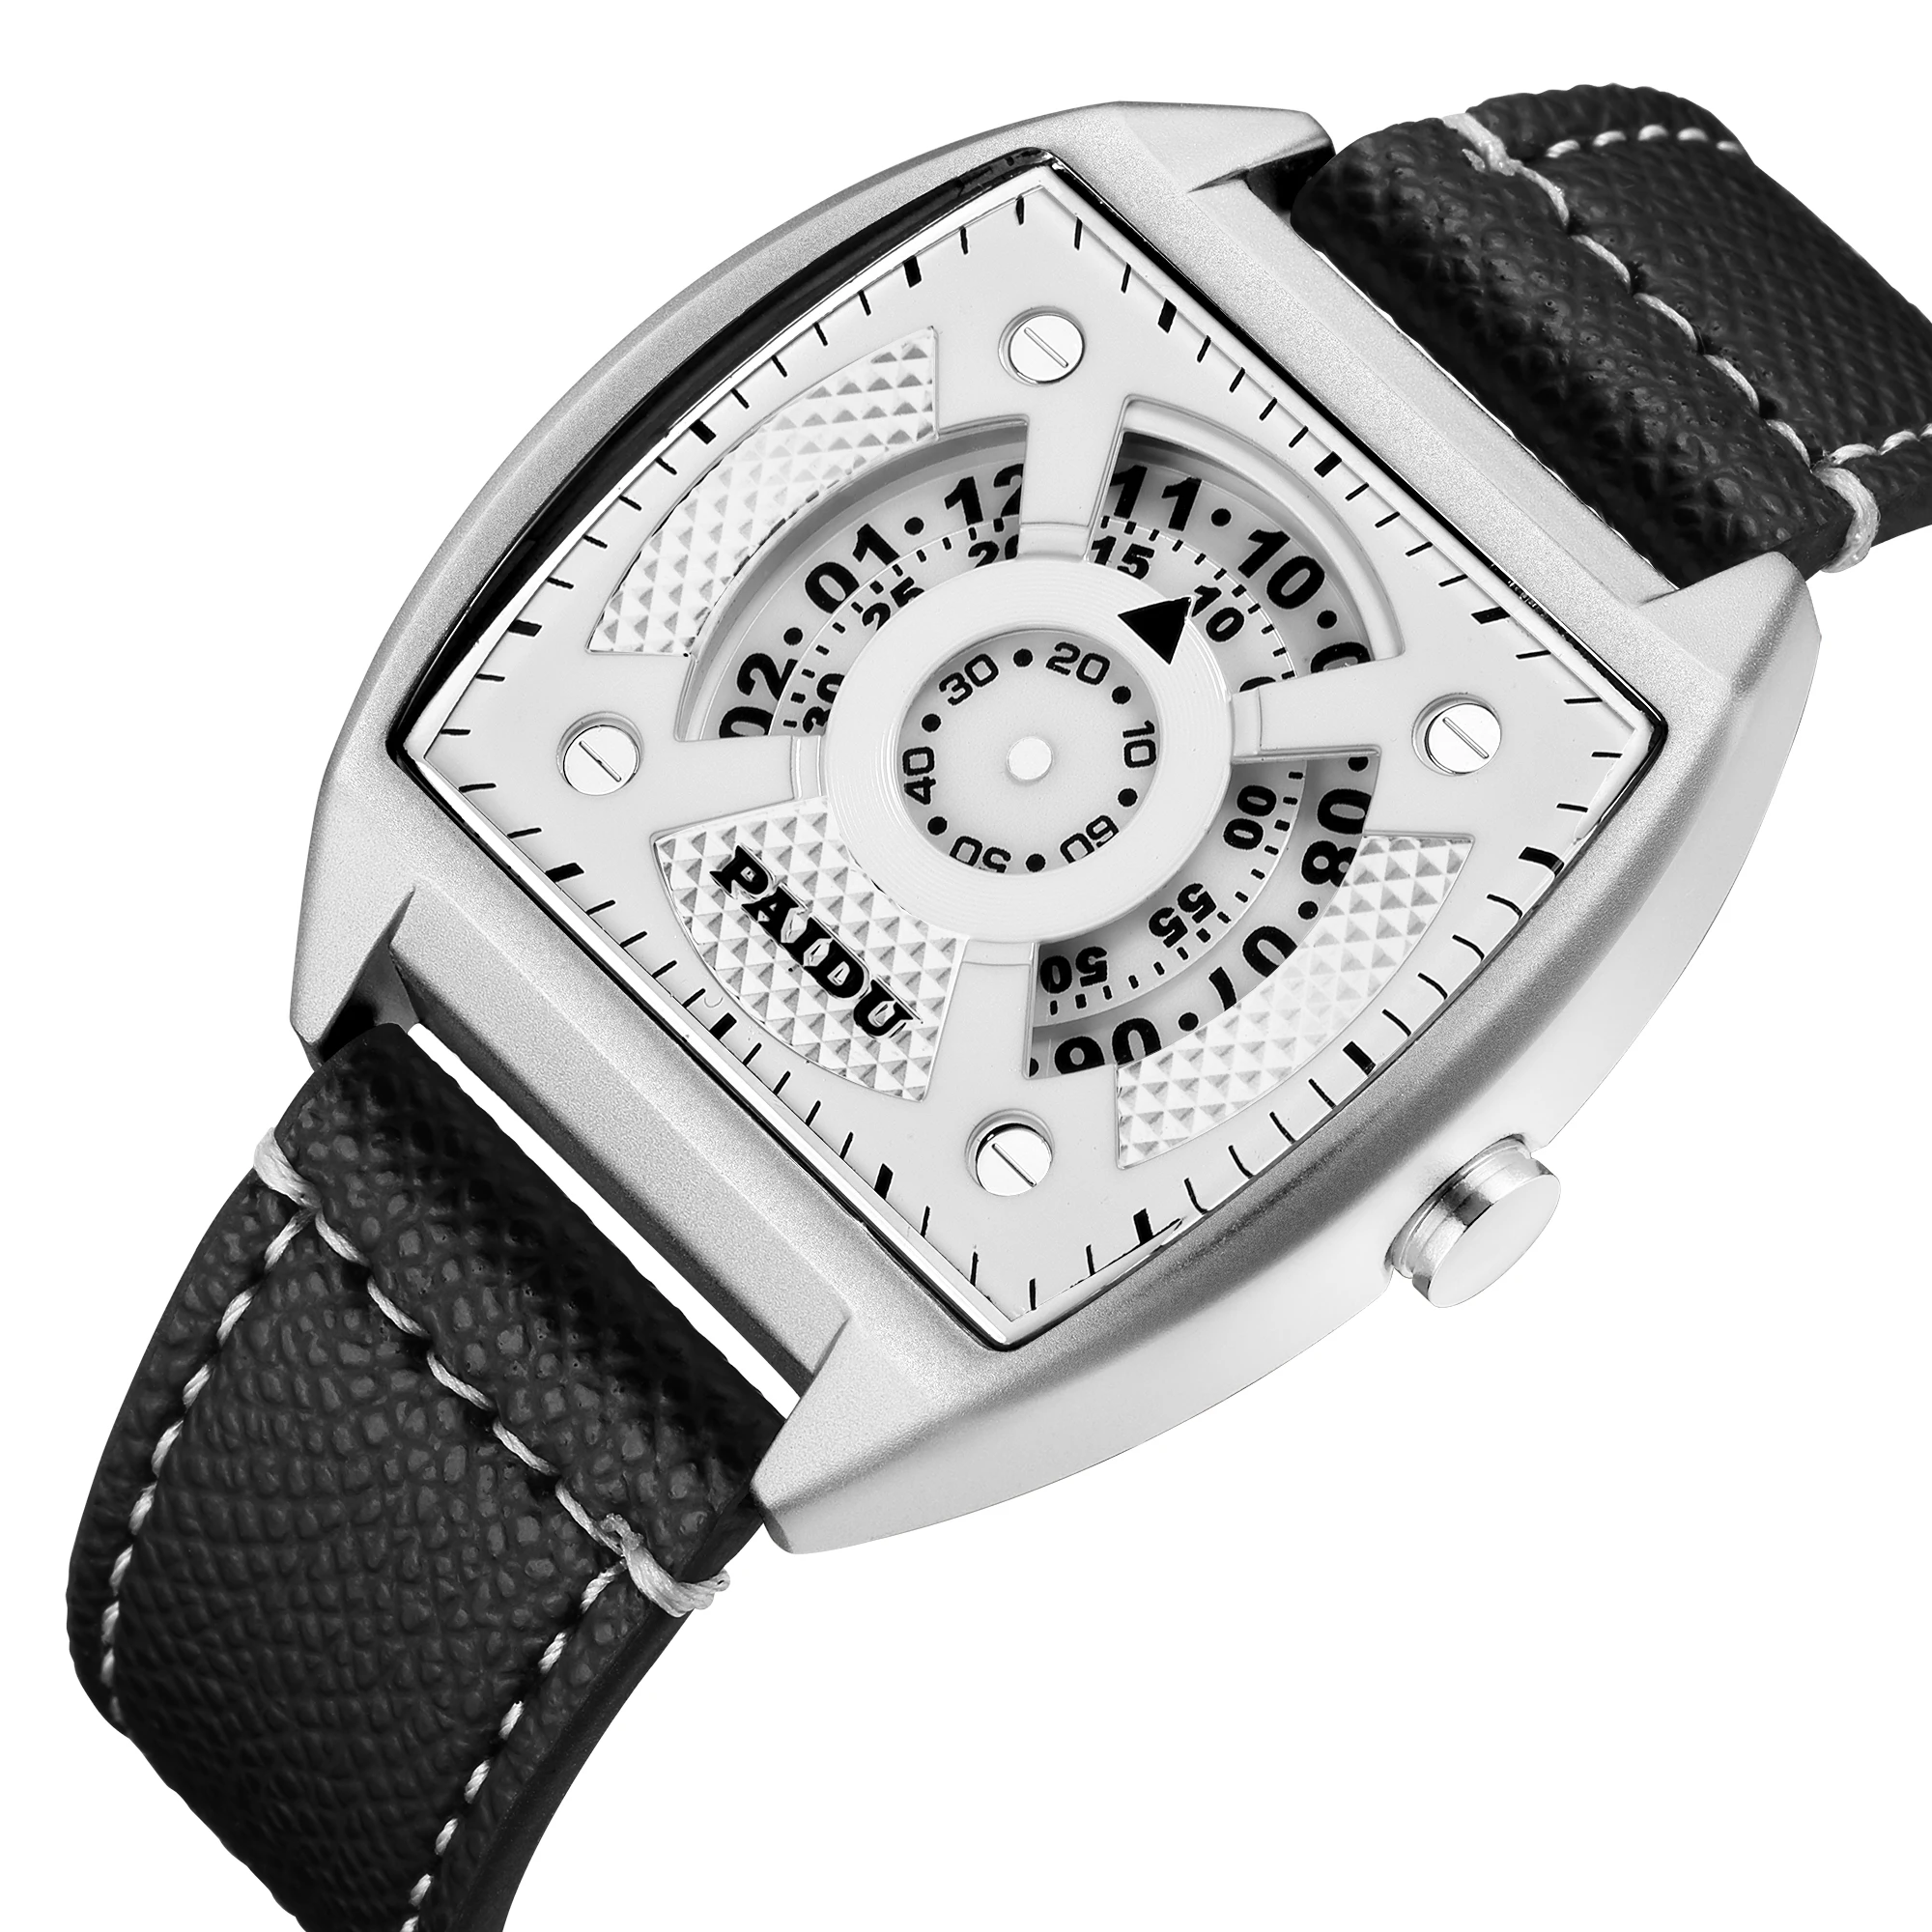 Paidu Watches Leather Men Waterproof 30M 2035 Movement Sports Quartz Watches Man Square Watch Dial for Black Face /white Face метро 2035 муос чистилище